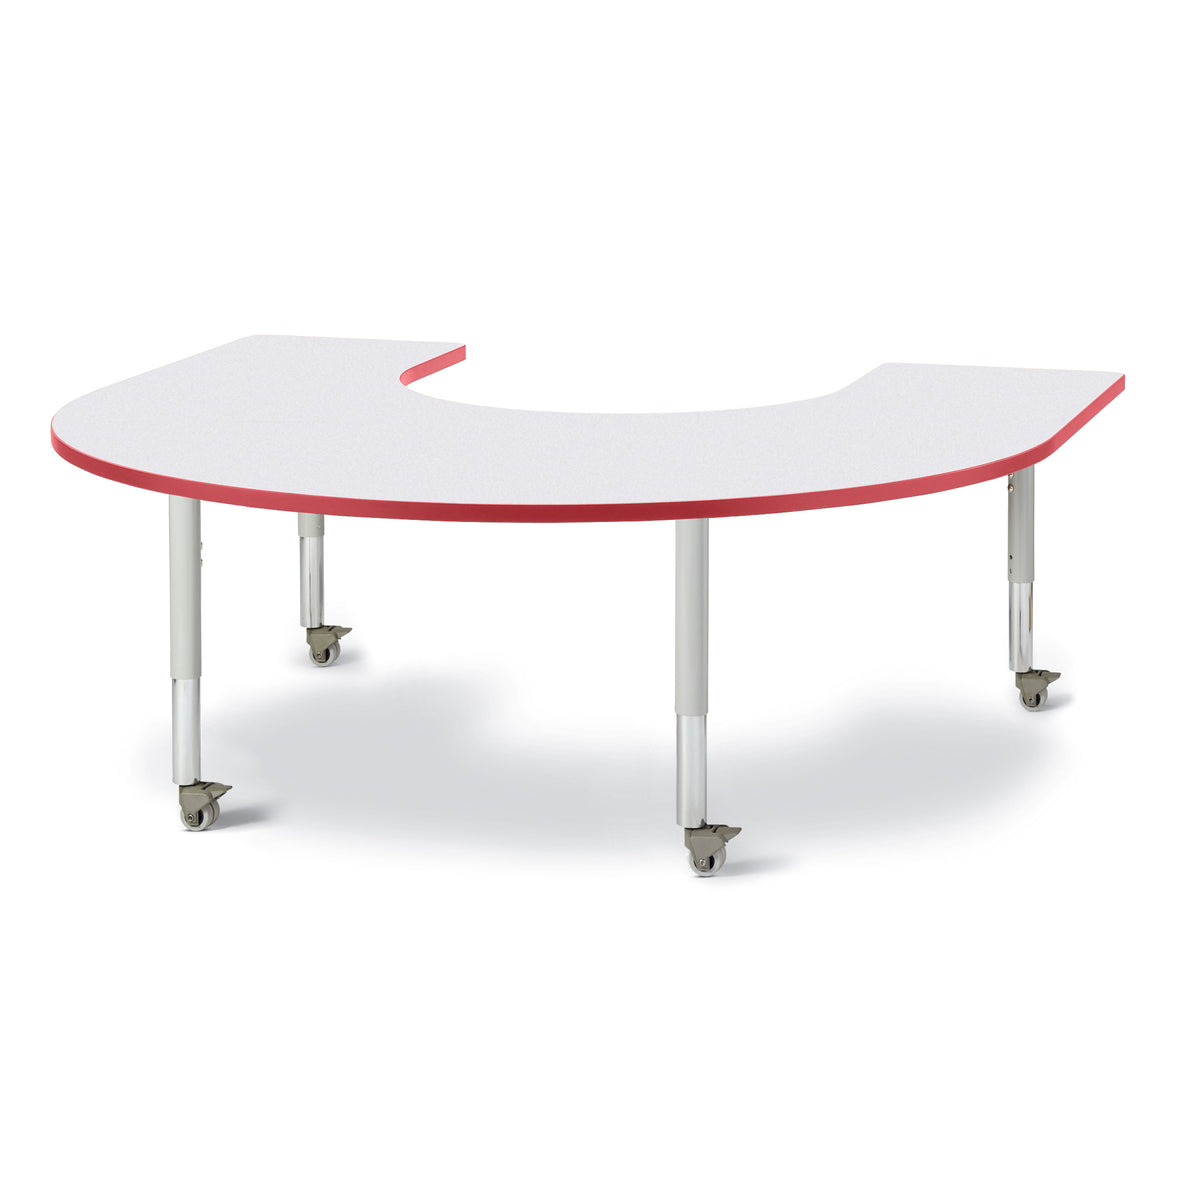 6445JCM008, Berries Horseshoe Activity Table - 66" X 60", Mobile - Freckled Gray/Red/Gray